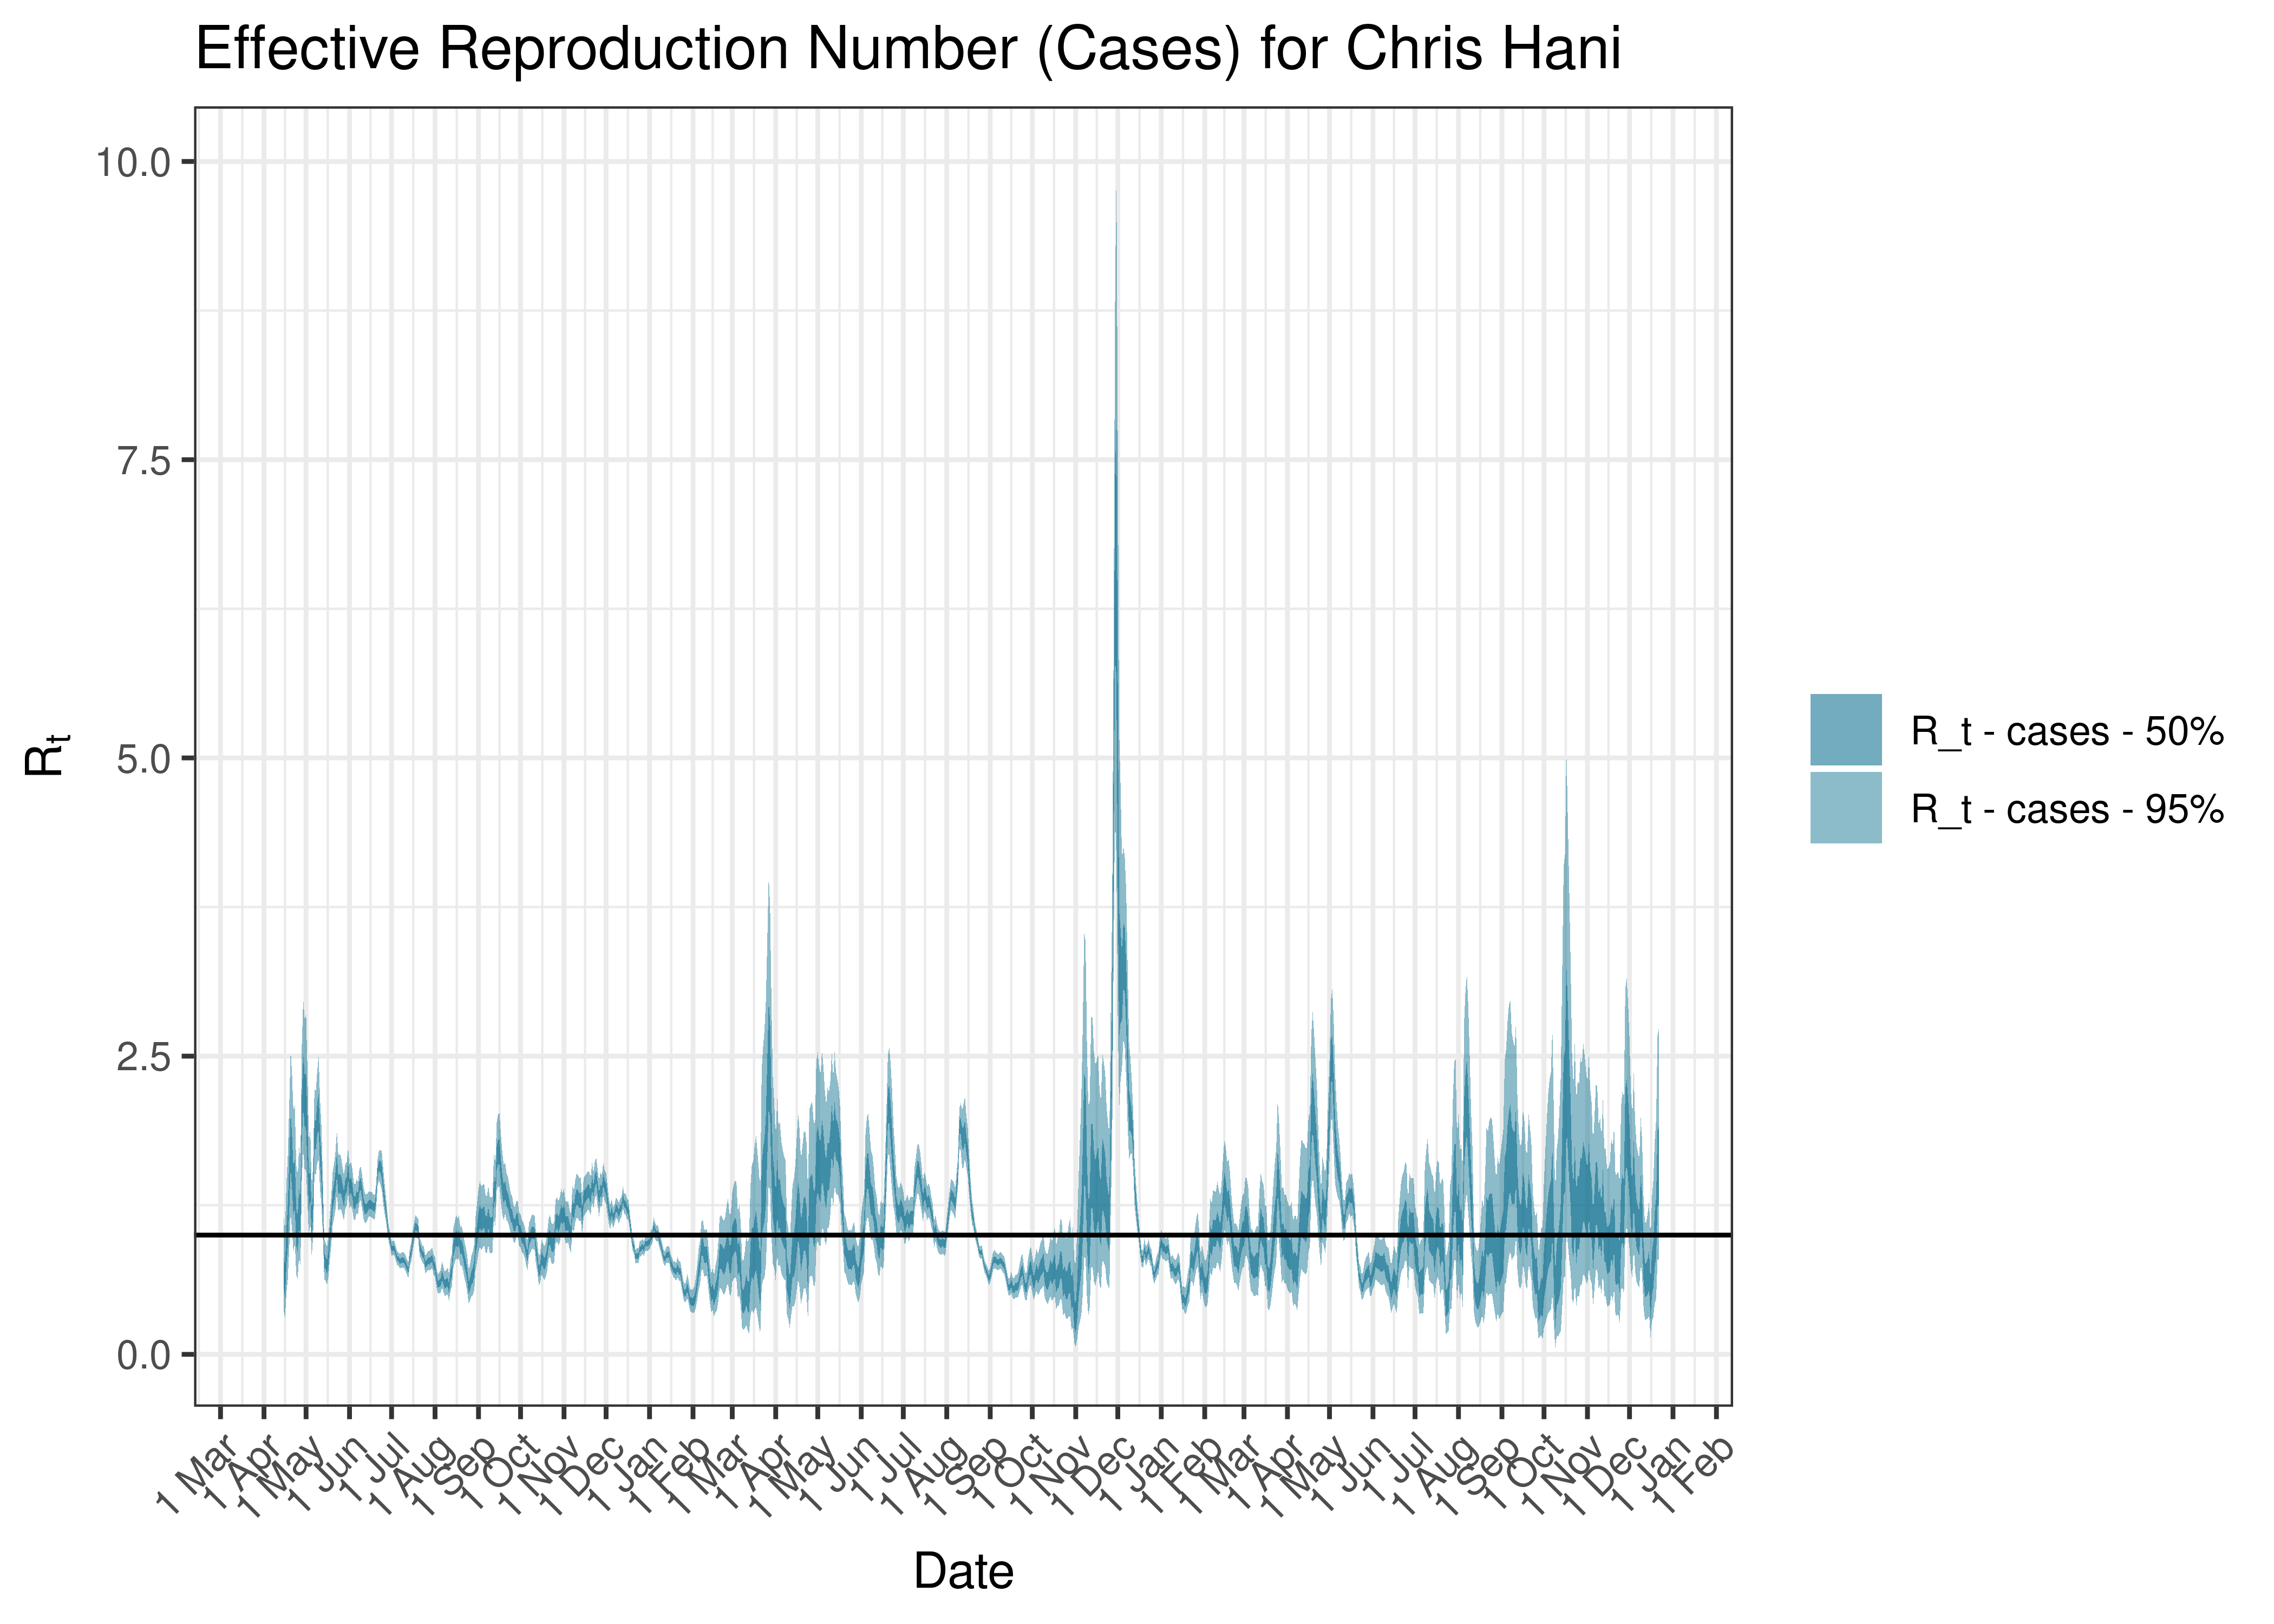 Estimated Effective Reproduction Number Based on Cases for Chris Hani since 1 April 2020